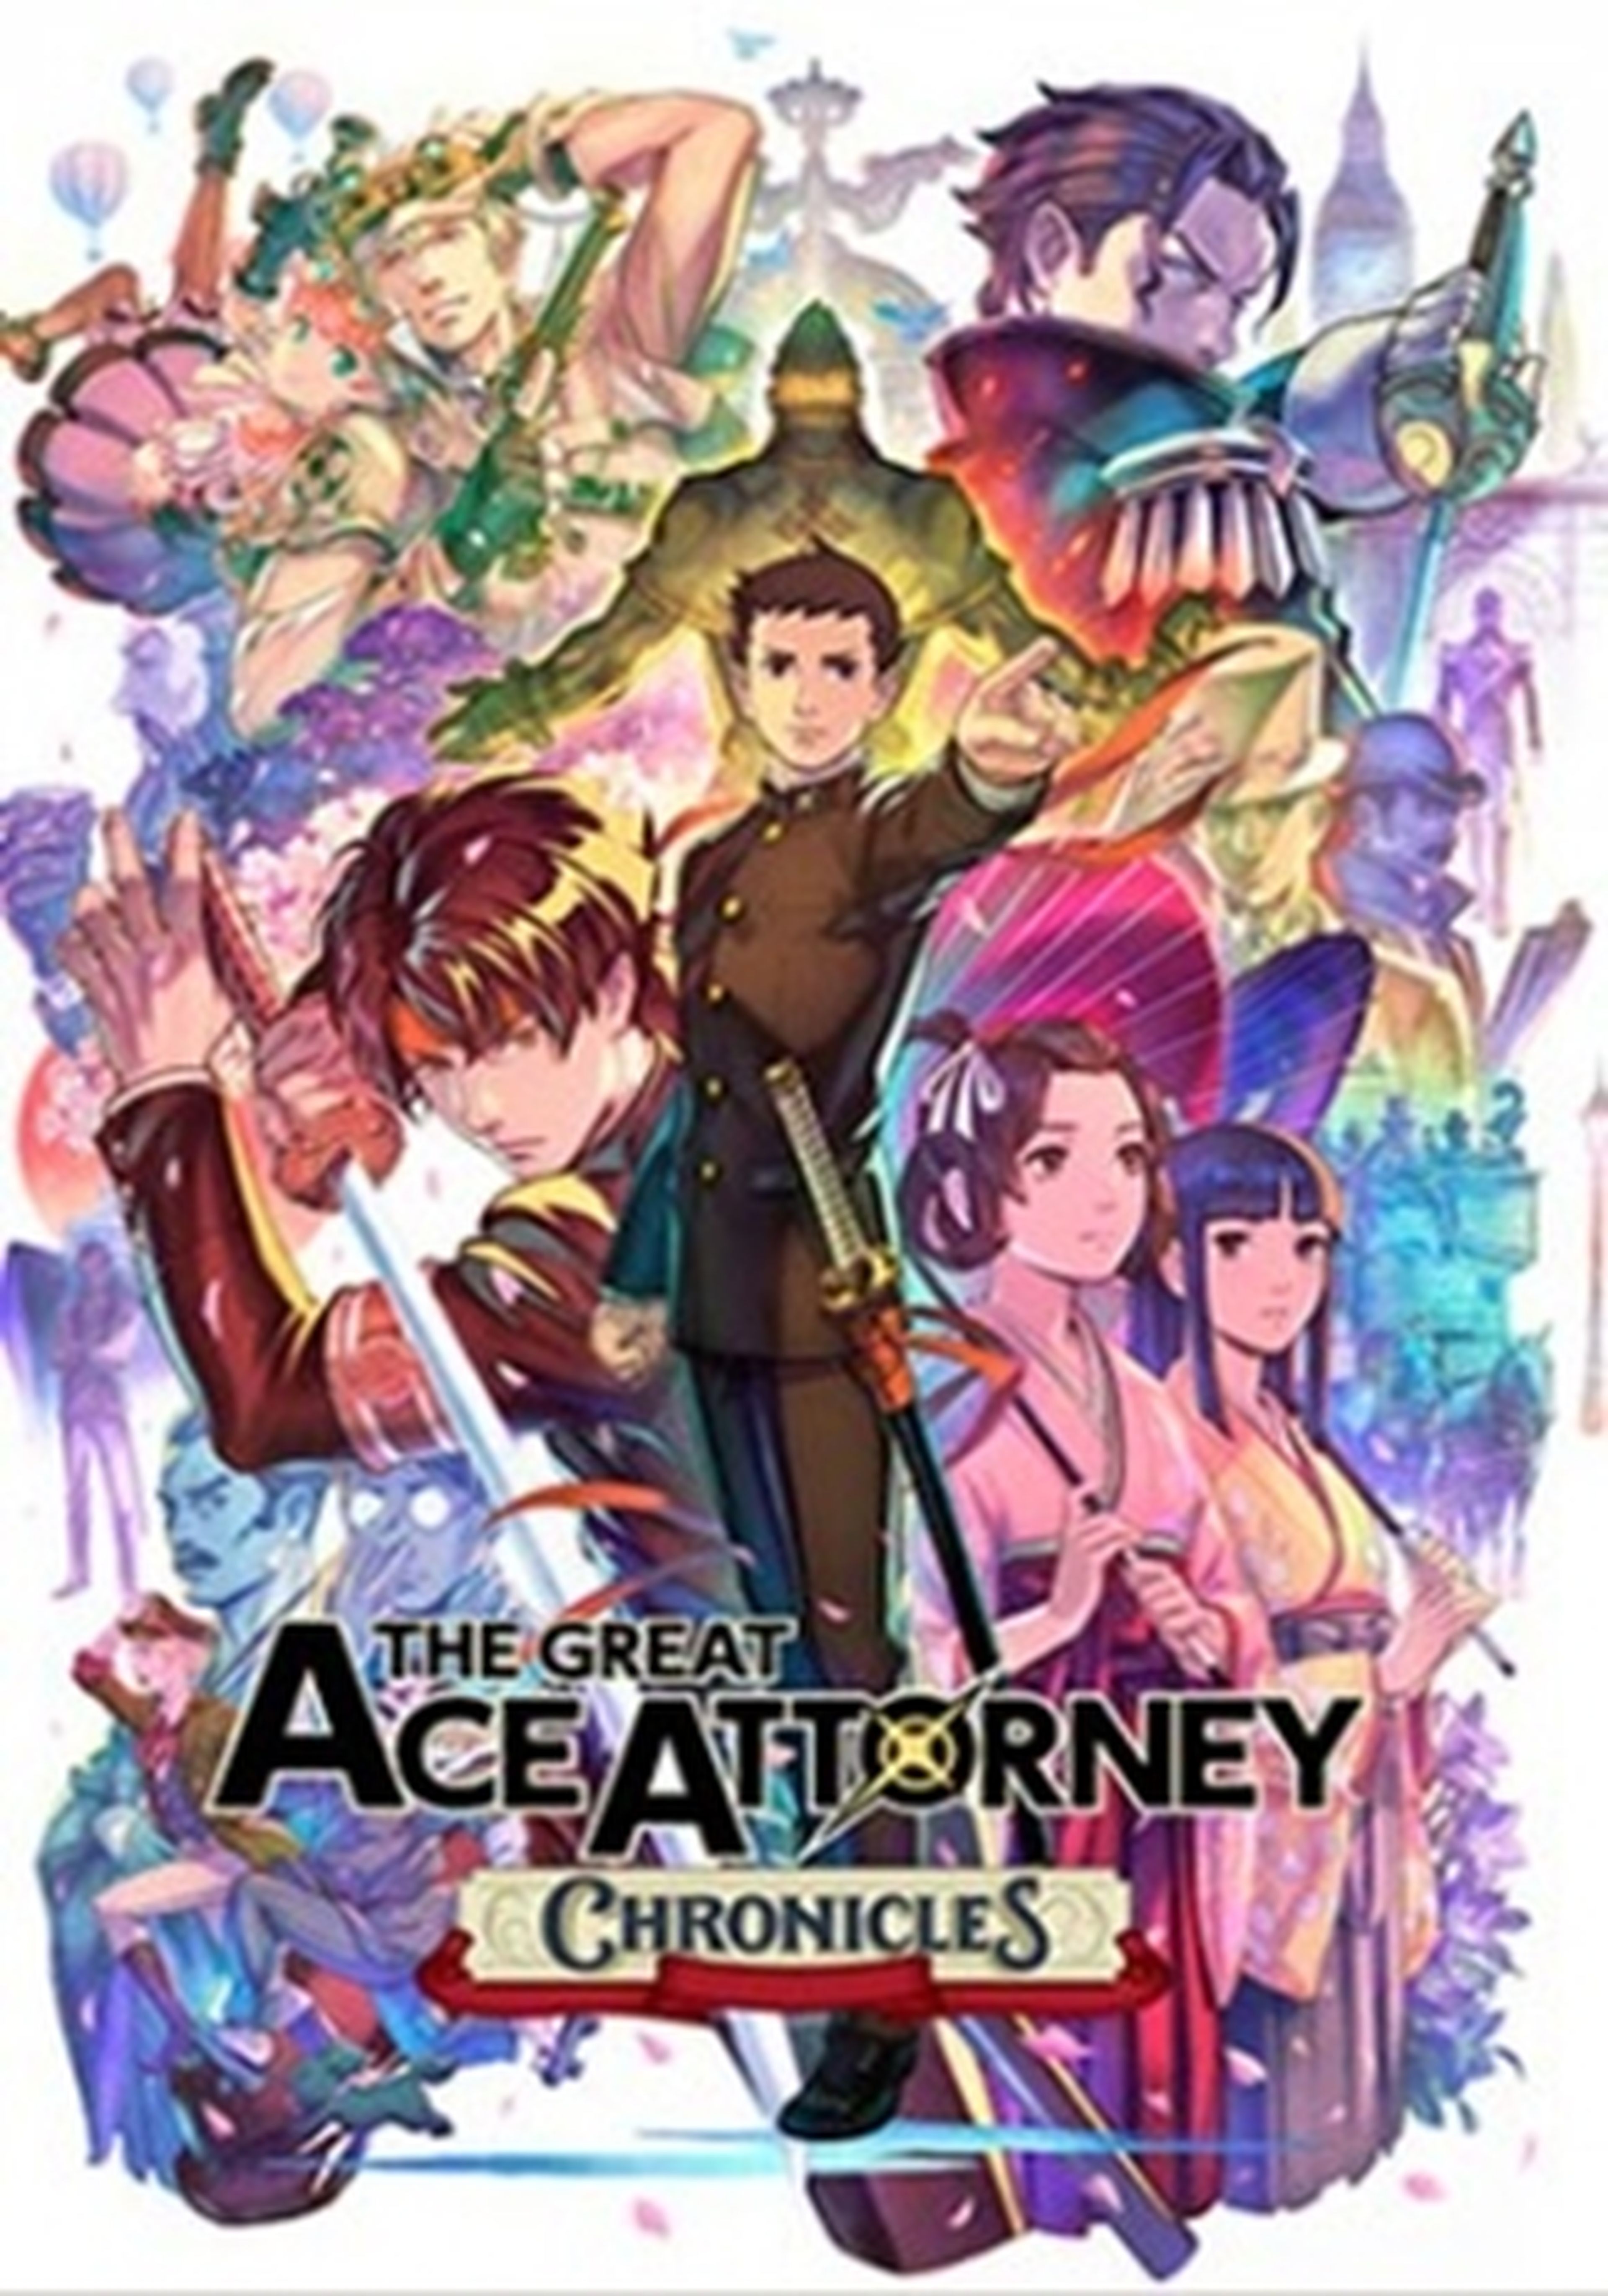 The Great Ace Attorney Chronicles cartel